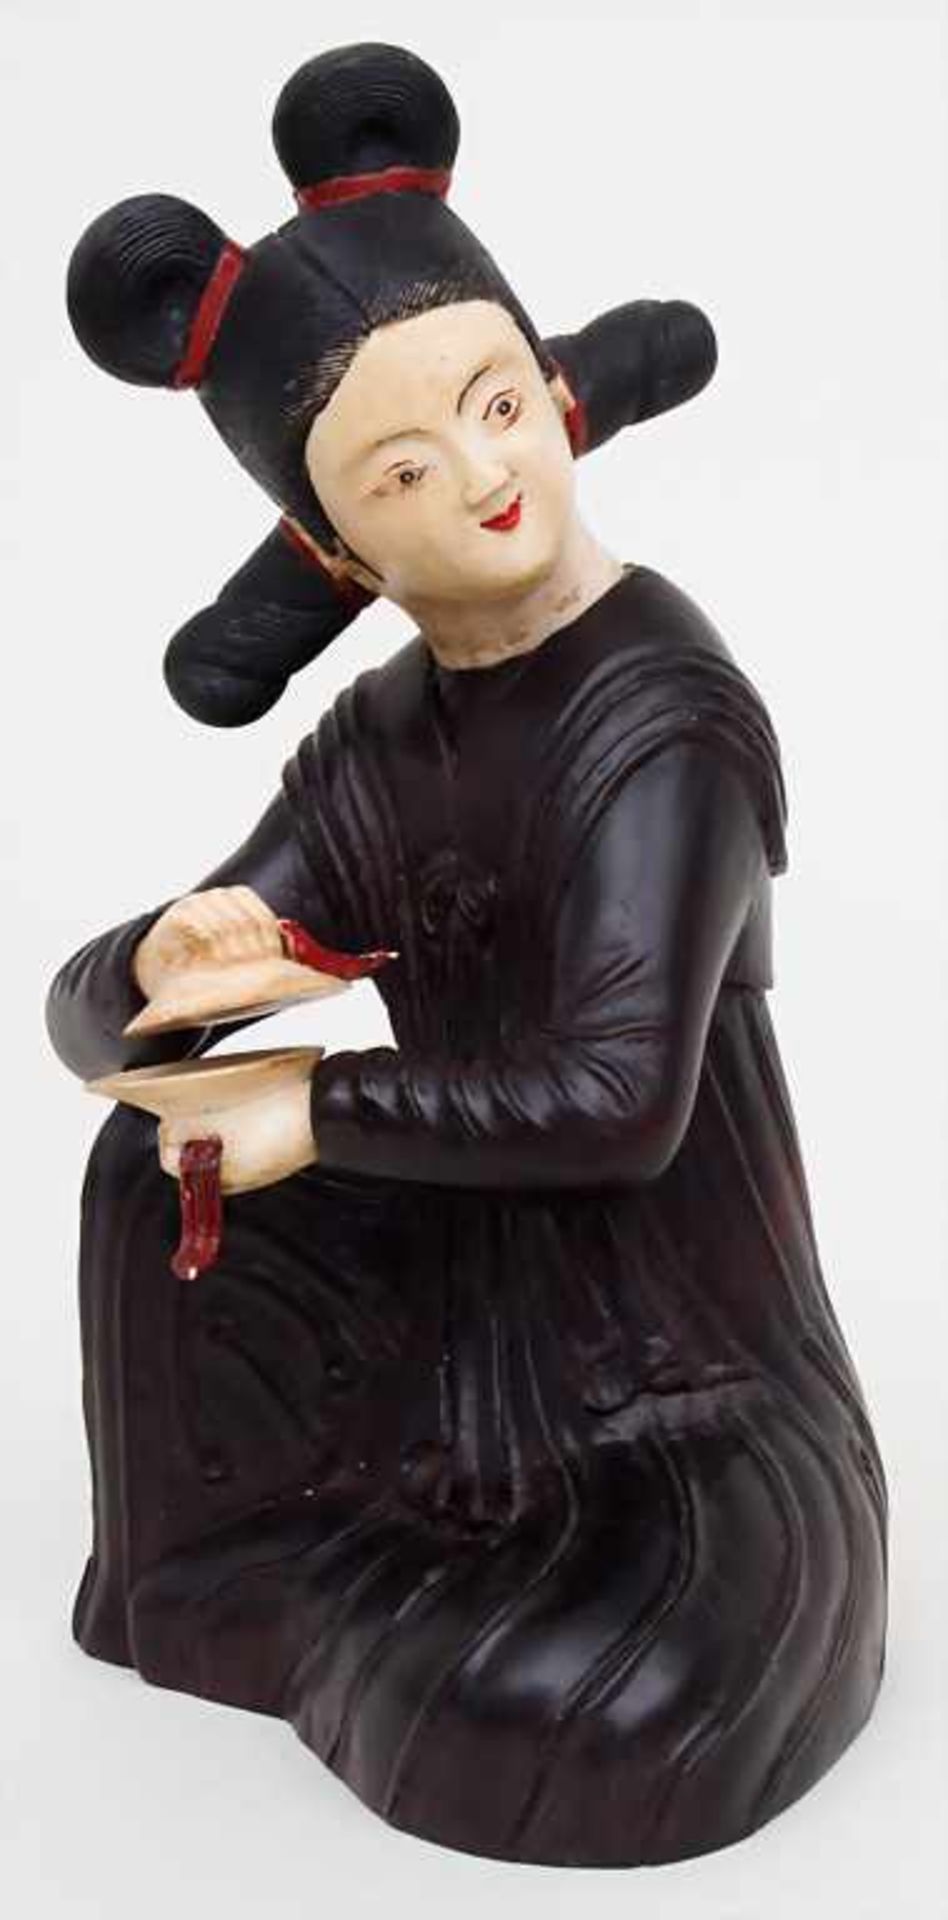 Sitzende Zimbelspielerin / A sitting cymbal player, China 19.-20. Jh.Material: Elfenbein, Huang-